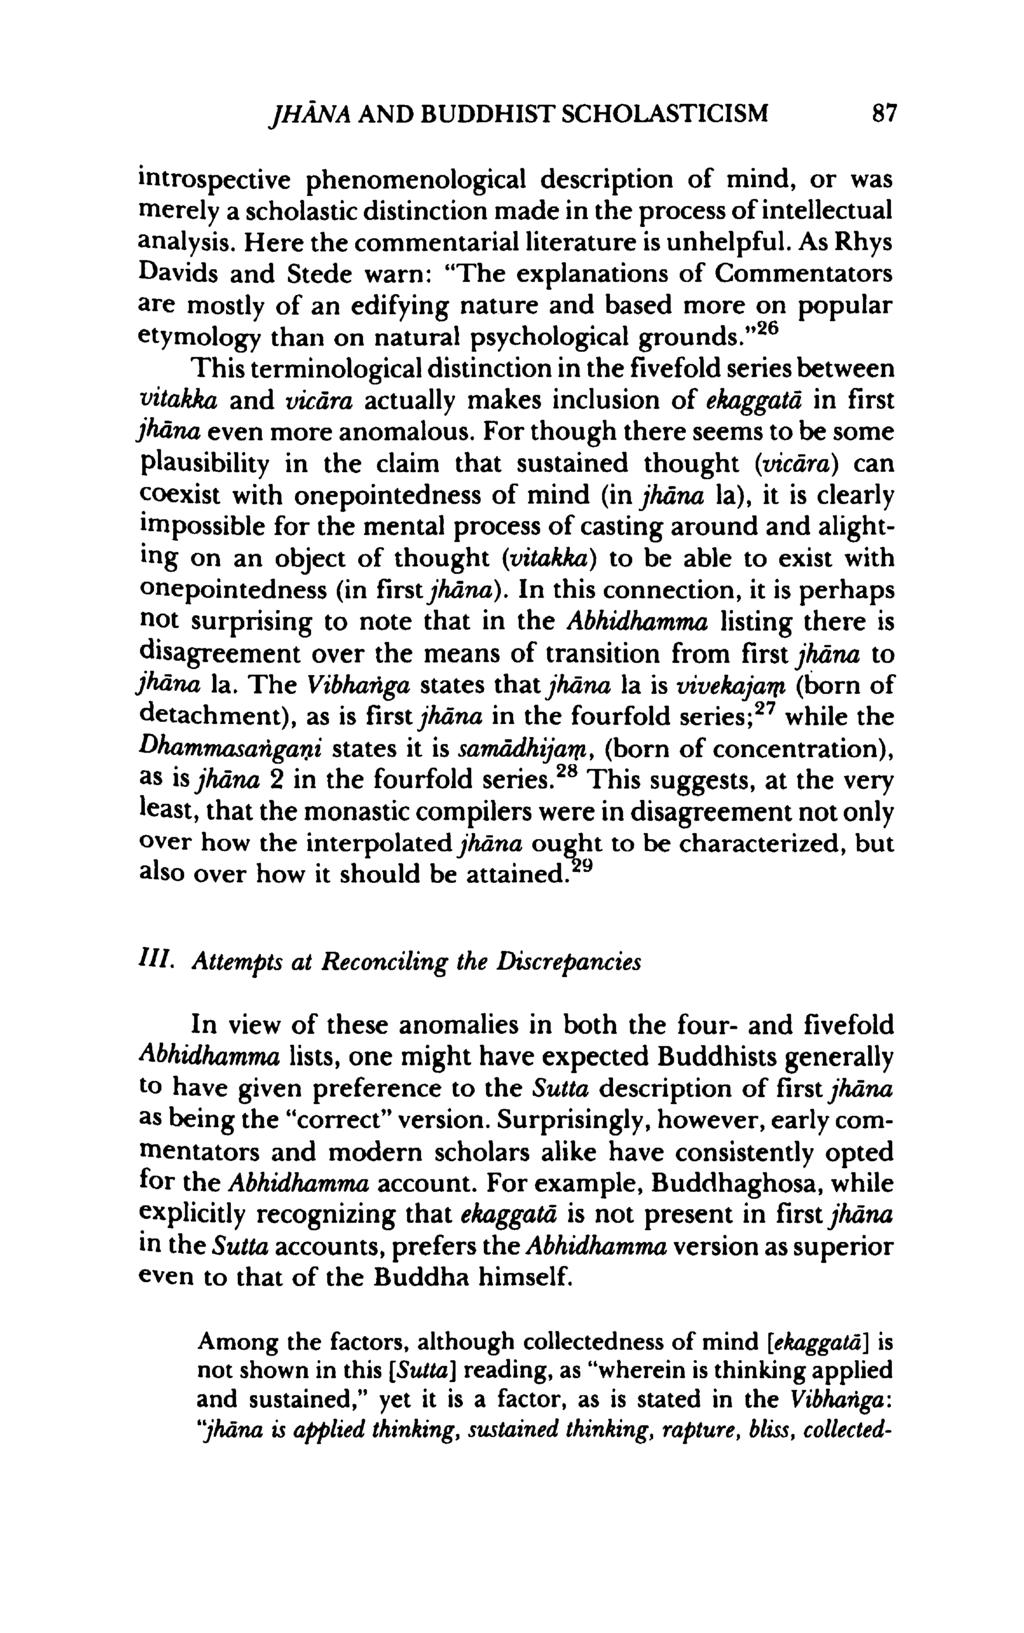 JHANA AND BUDDHIST SCHOLASTICISM 87 introspective phenomenological description of mind, or was merely a scholastic distinction made in the process of intellectual analysis.